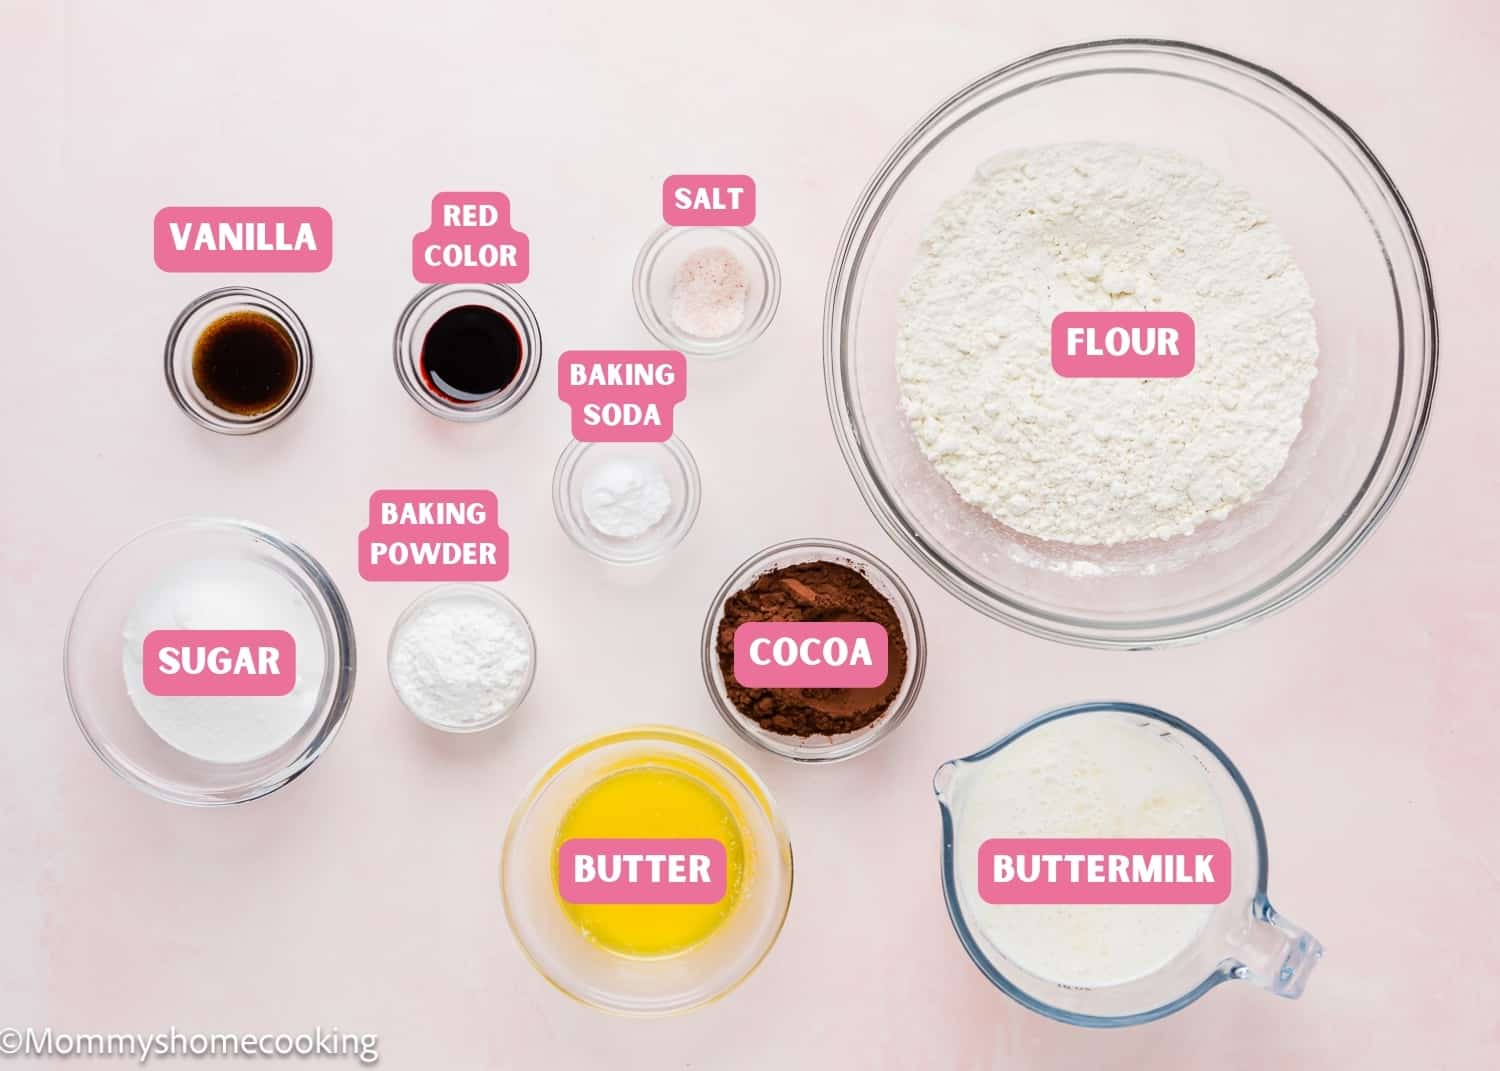 Ingredients needed to make red velvet pancakes (no eggs) with tag names.